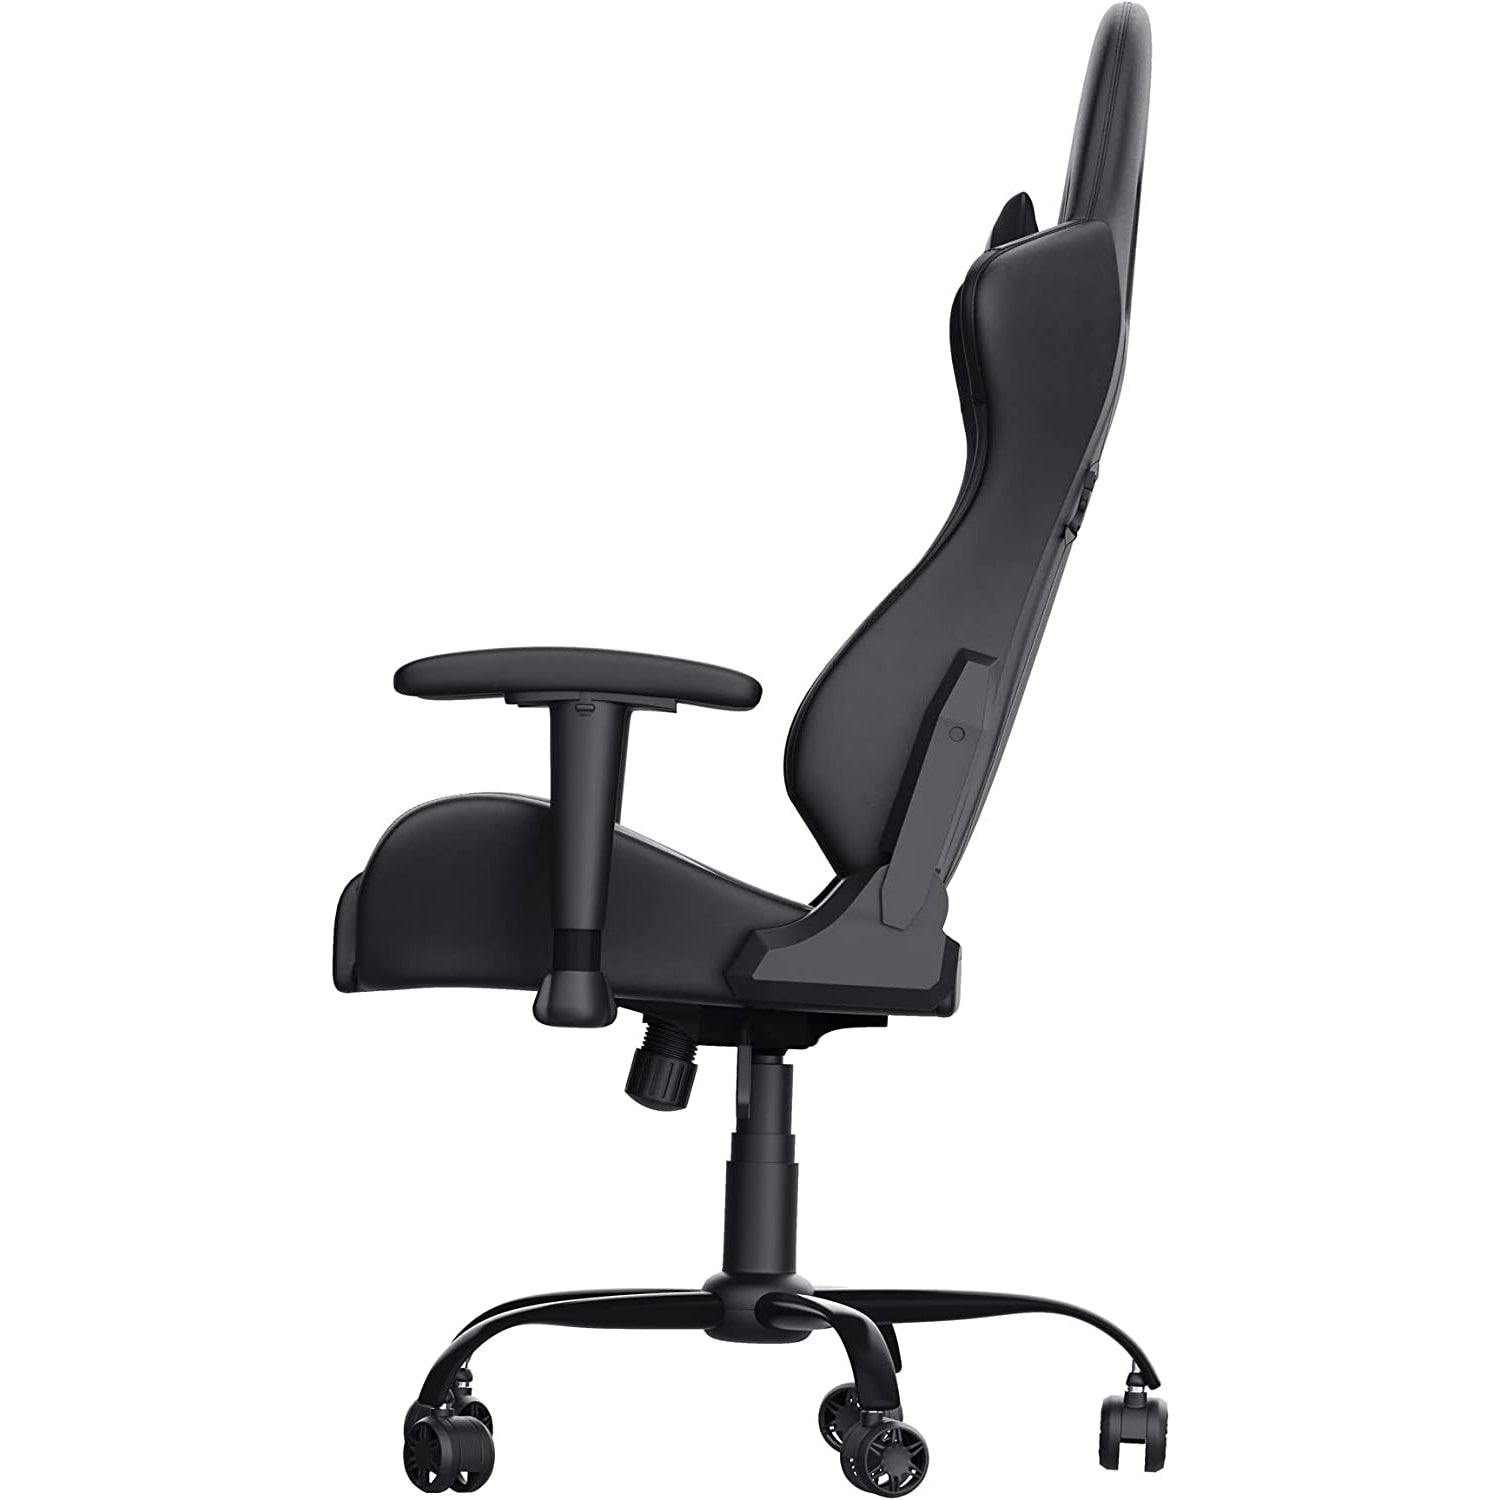 Trust Gaming GXT 708 Resto Gaming Chair - Black